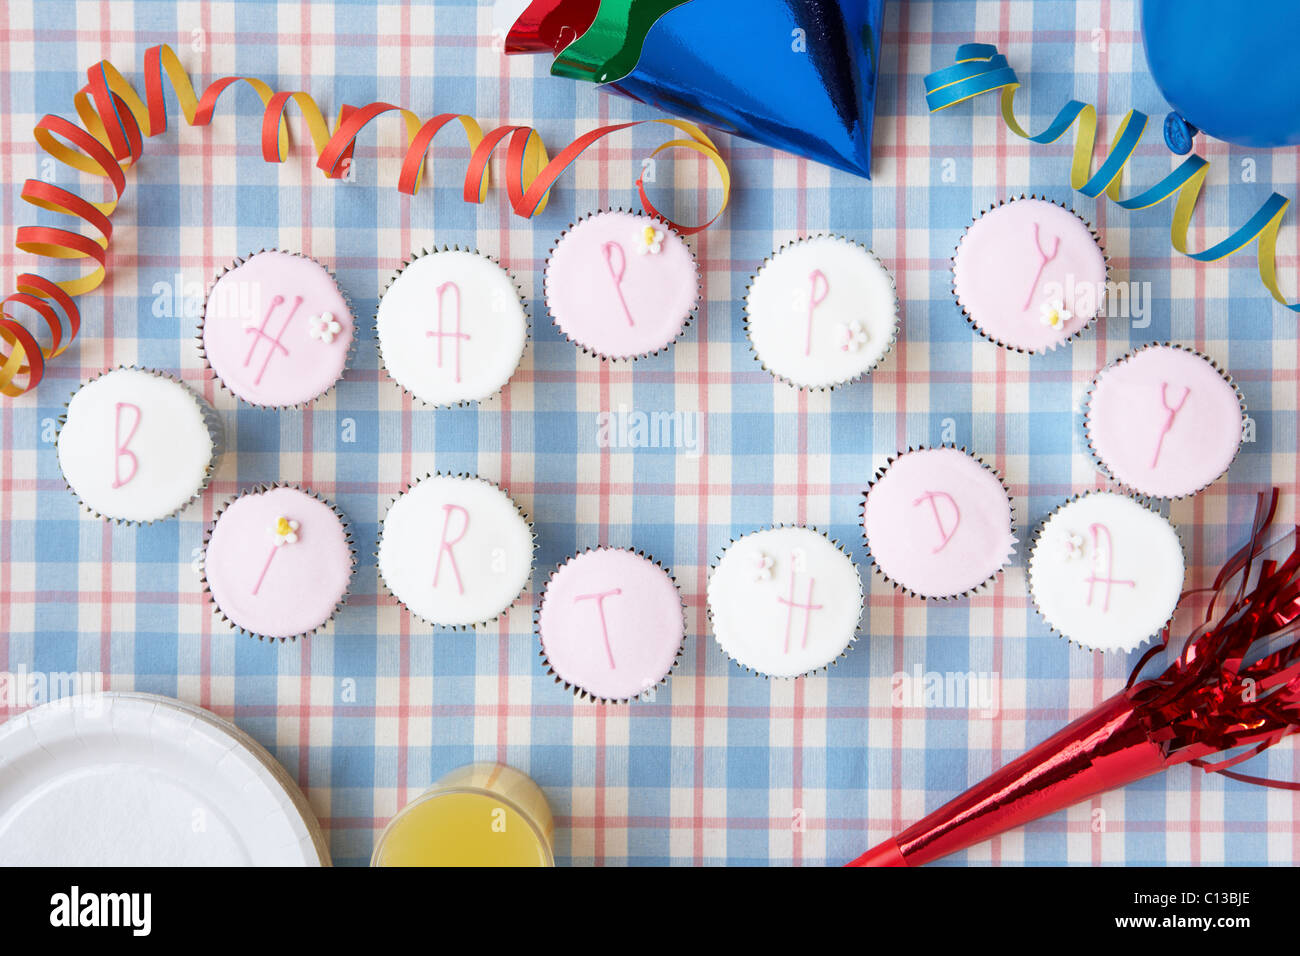 Cupcakes spell out happy birthday Stock Photo